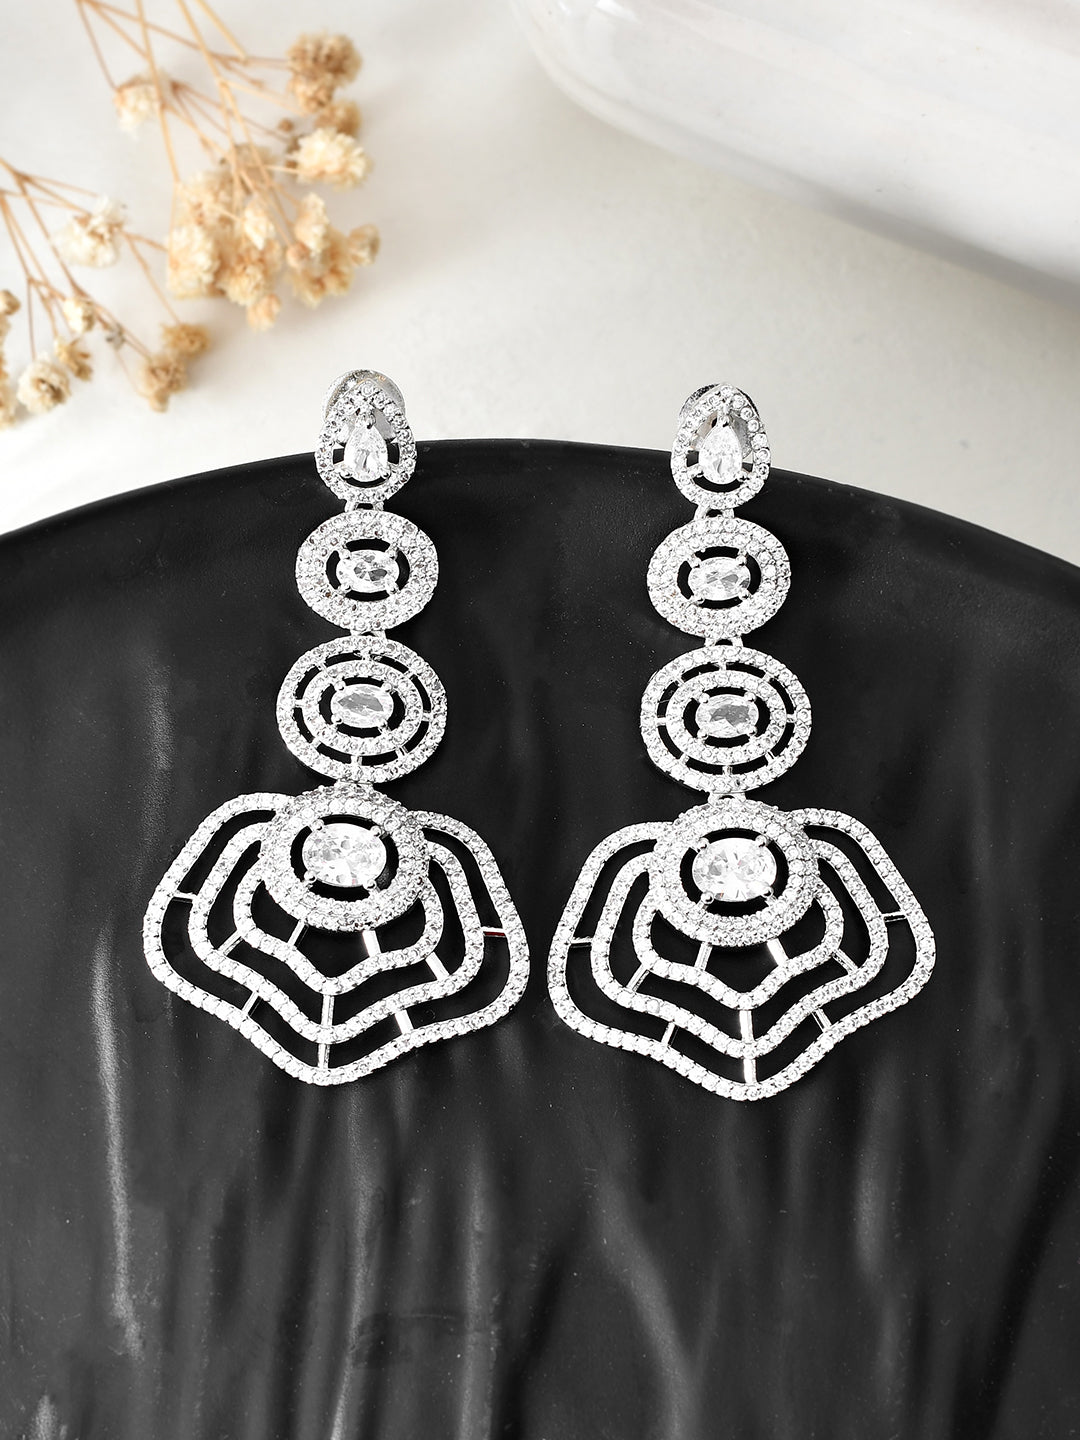 These American Diamond Cut work dangler earrings add a touch of elegance to any outfit. With intricate cut work and a sparkling finish, these earrings are perfect for any occasion. Crafted with precision and artistry, these earrings are a must-have for any jewelry collection